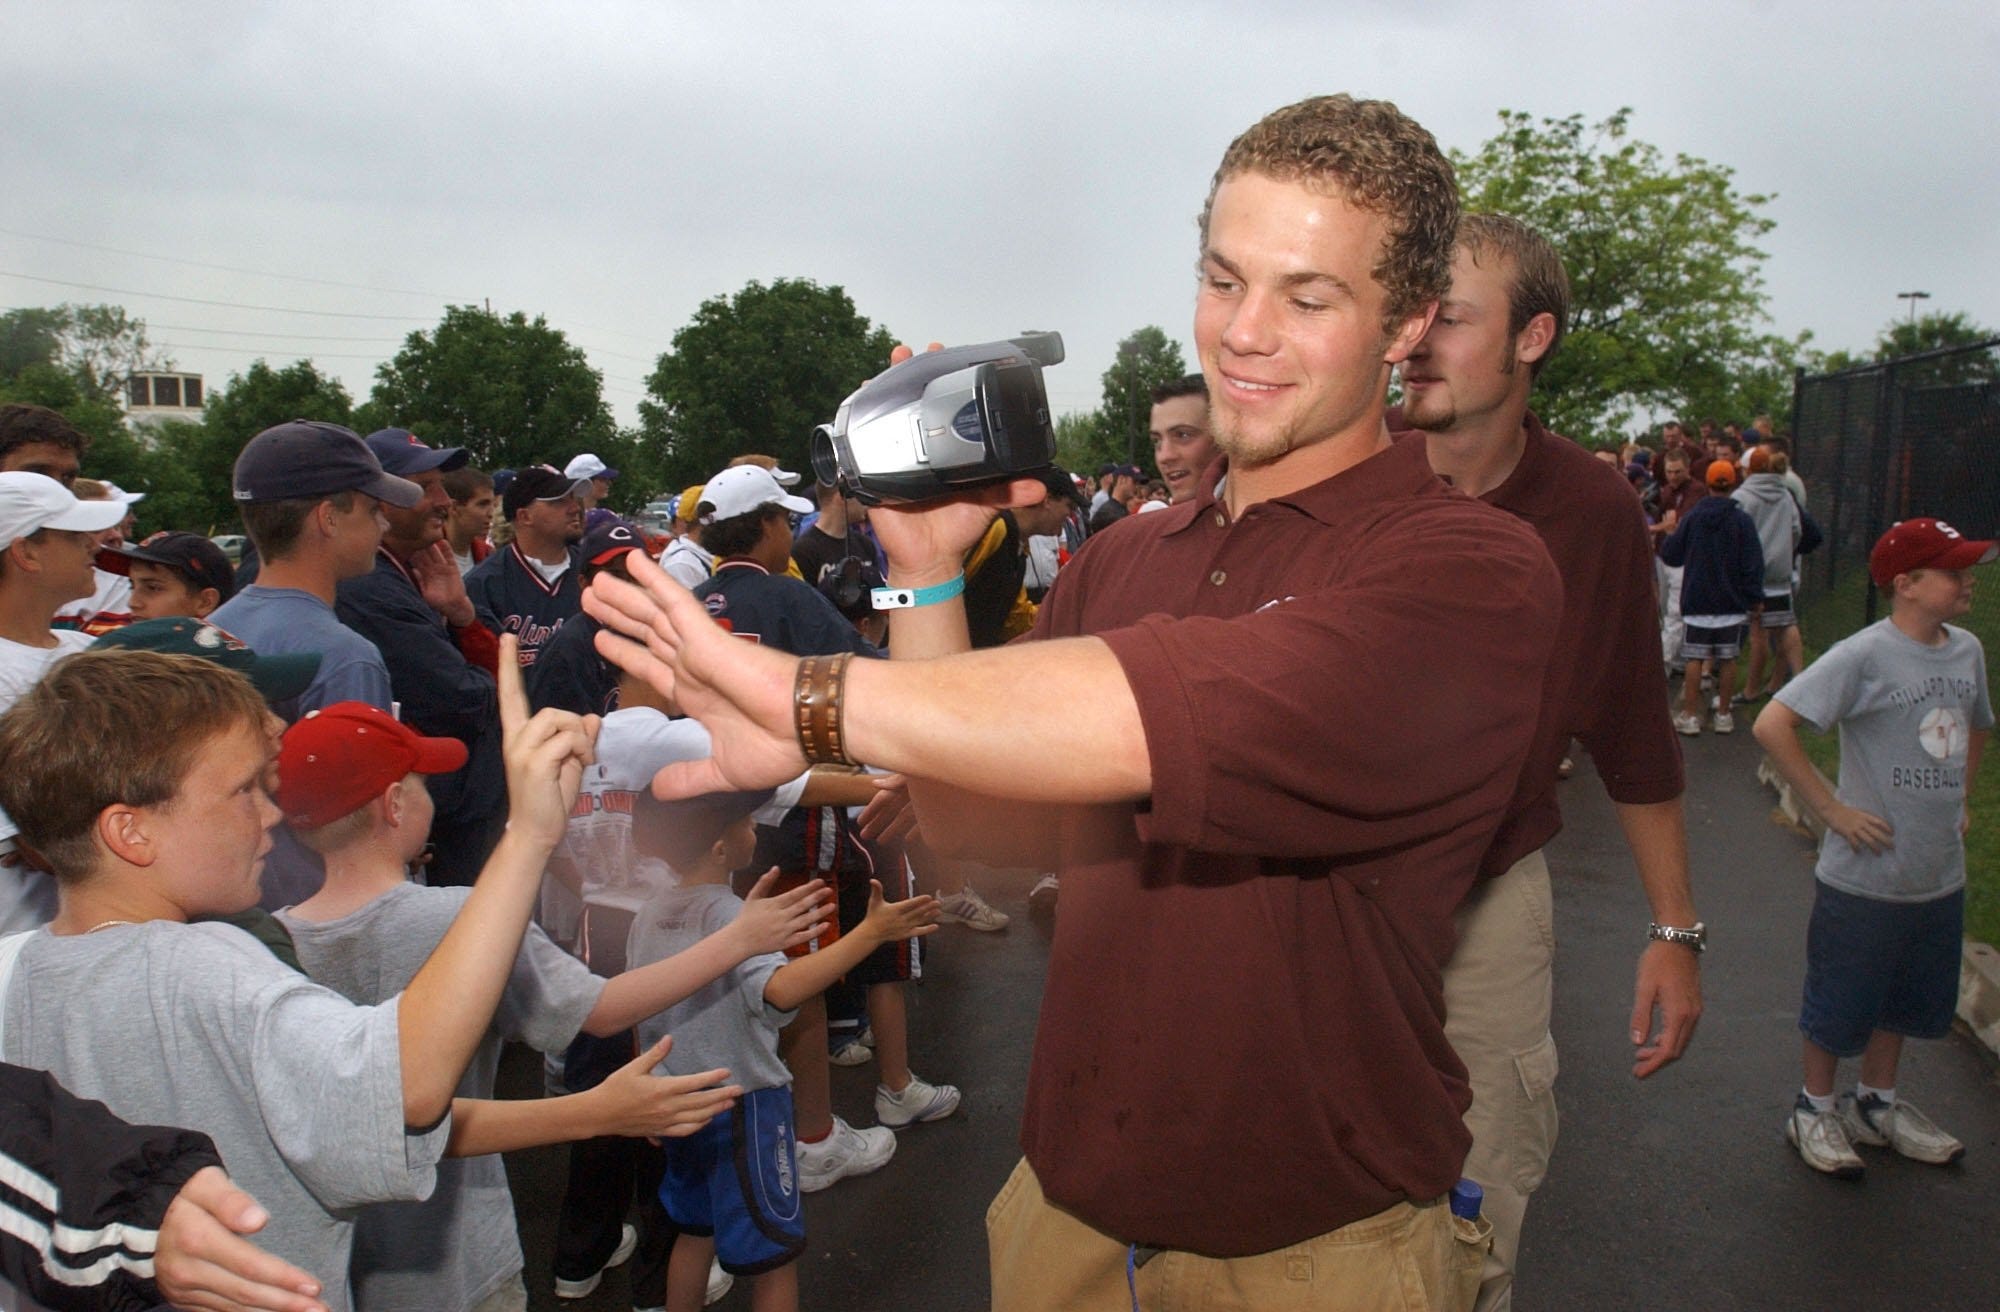 SMS catcher Tony Piazza videotapes the team's entrance to Rosenblatt Stadium as he collects high fives from fans Thursday evening before an autograph session and opening ceremonies for the College World Series.